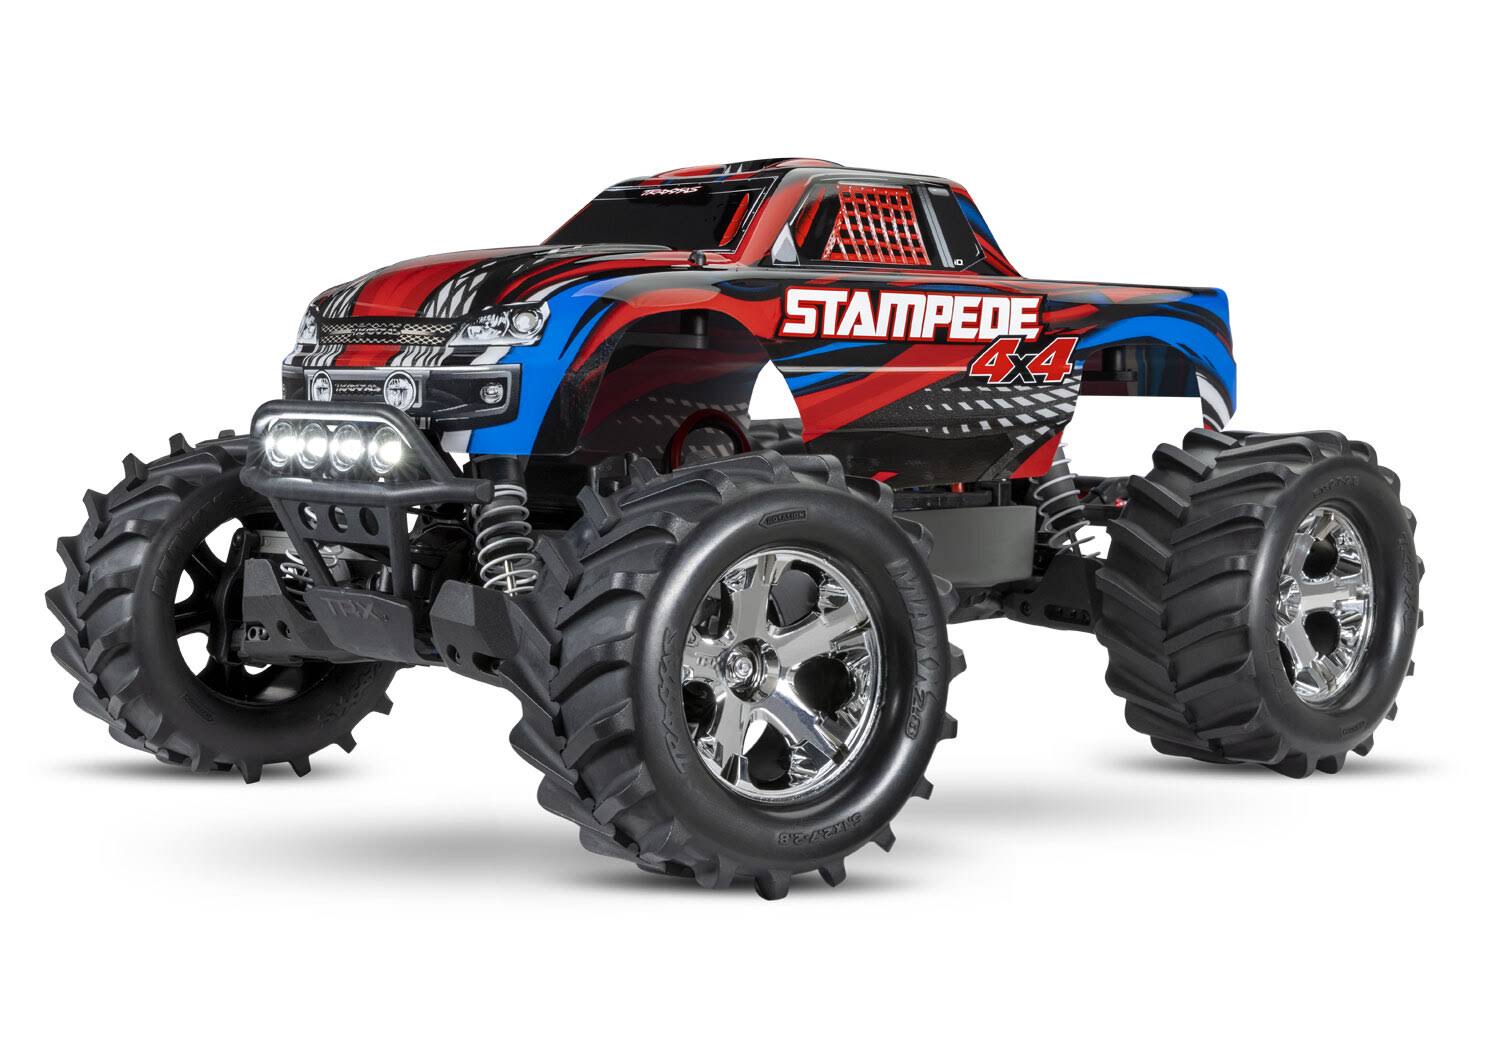 Traxxas Stampede 4x4 Brushed XL-5 - Red with LED TRX67054-61-RED